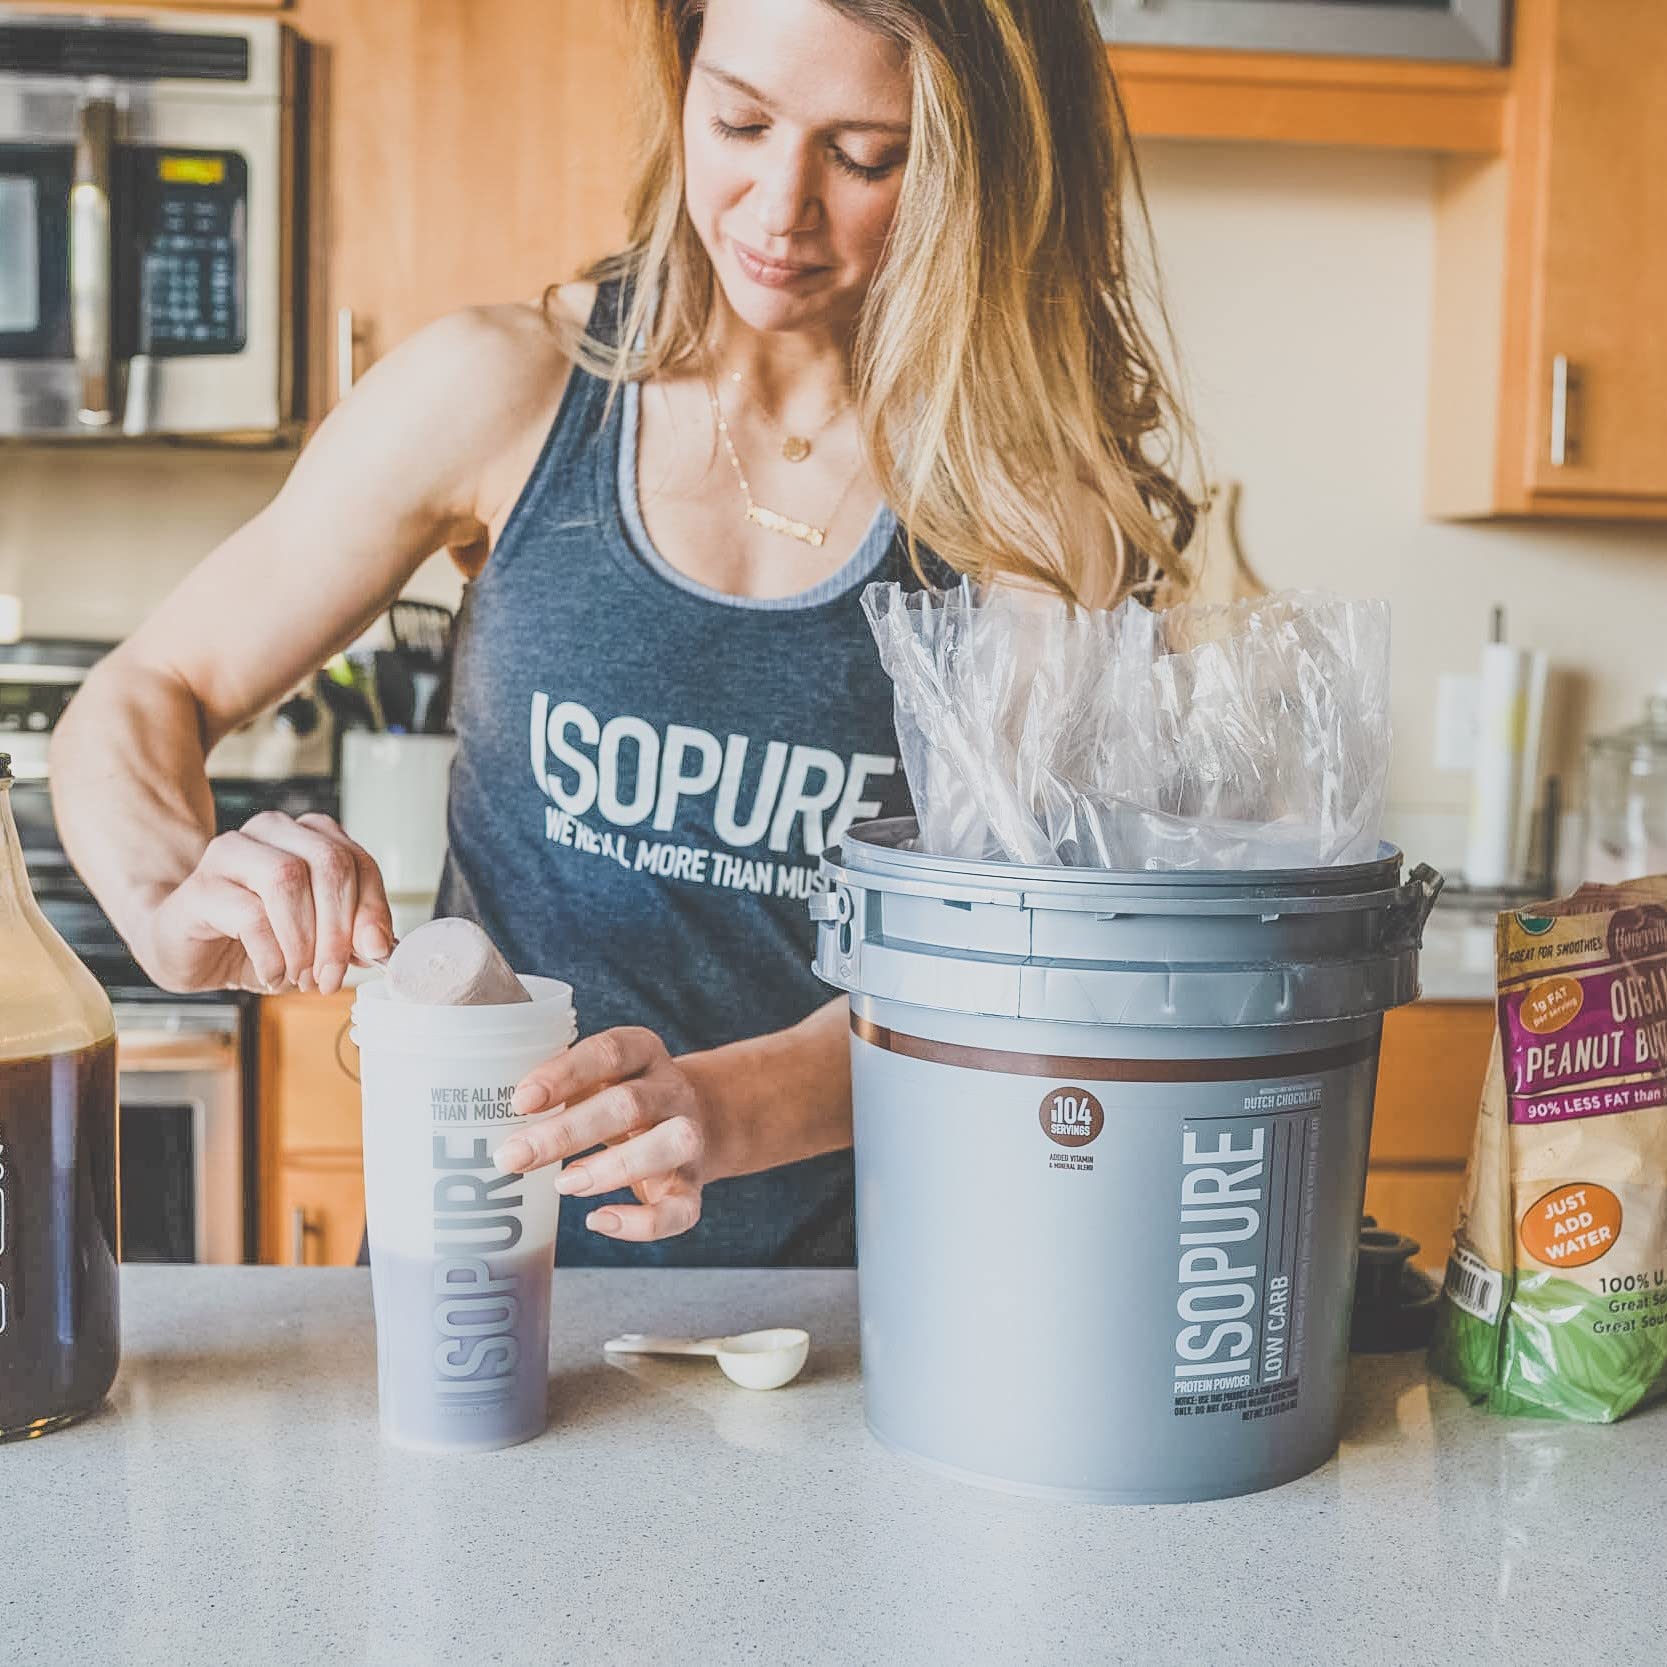 Isopure Protein Powder Low Carb With Creatine Powder 500g Unflavored, Keto Friendly Protein Powder, 100% Whey Protein Isolate, Protein Flavor: Dutch Chocolate, 7.5 Pounds